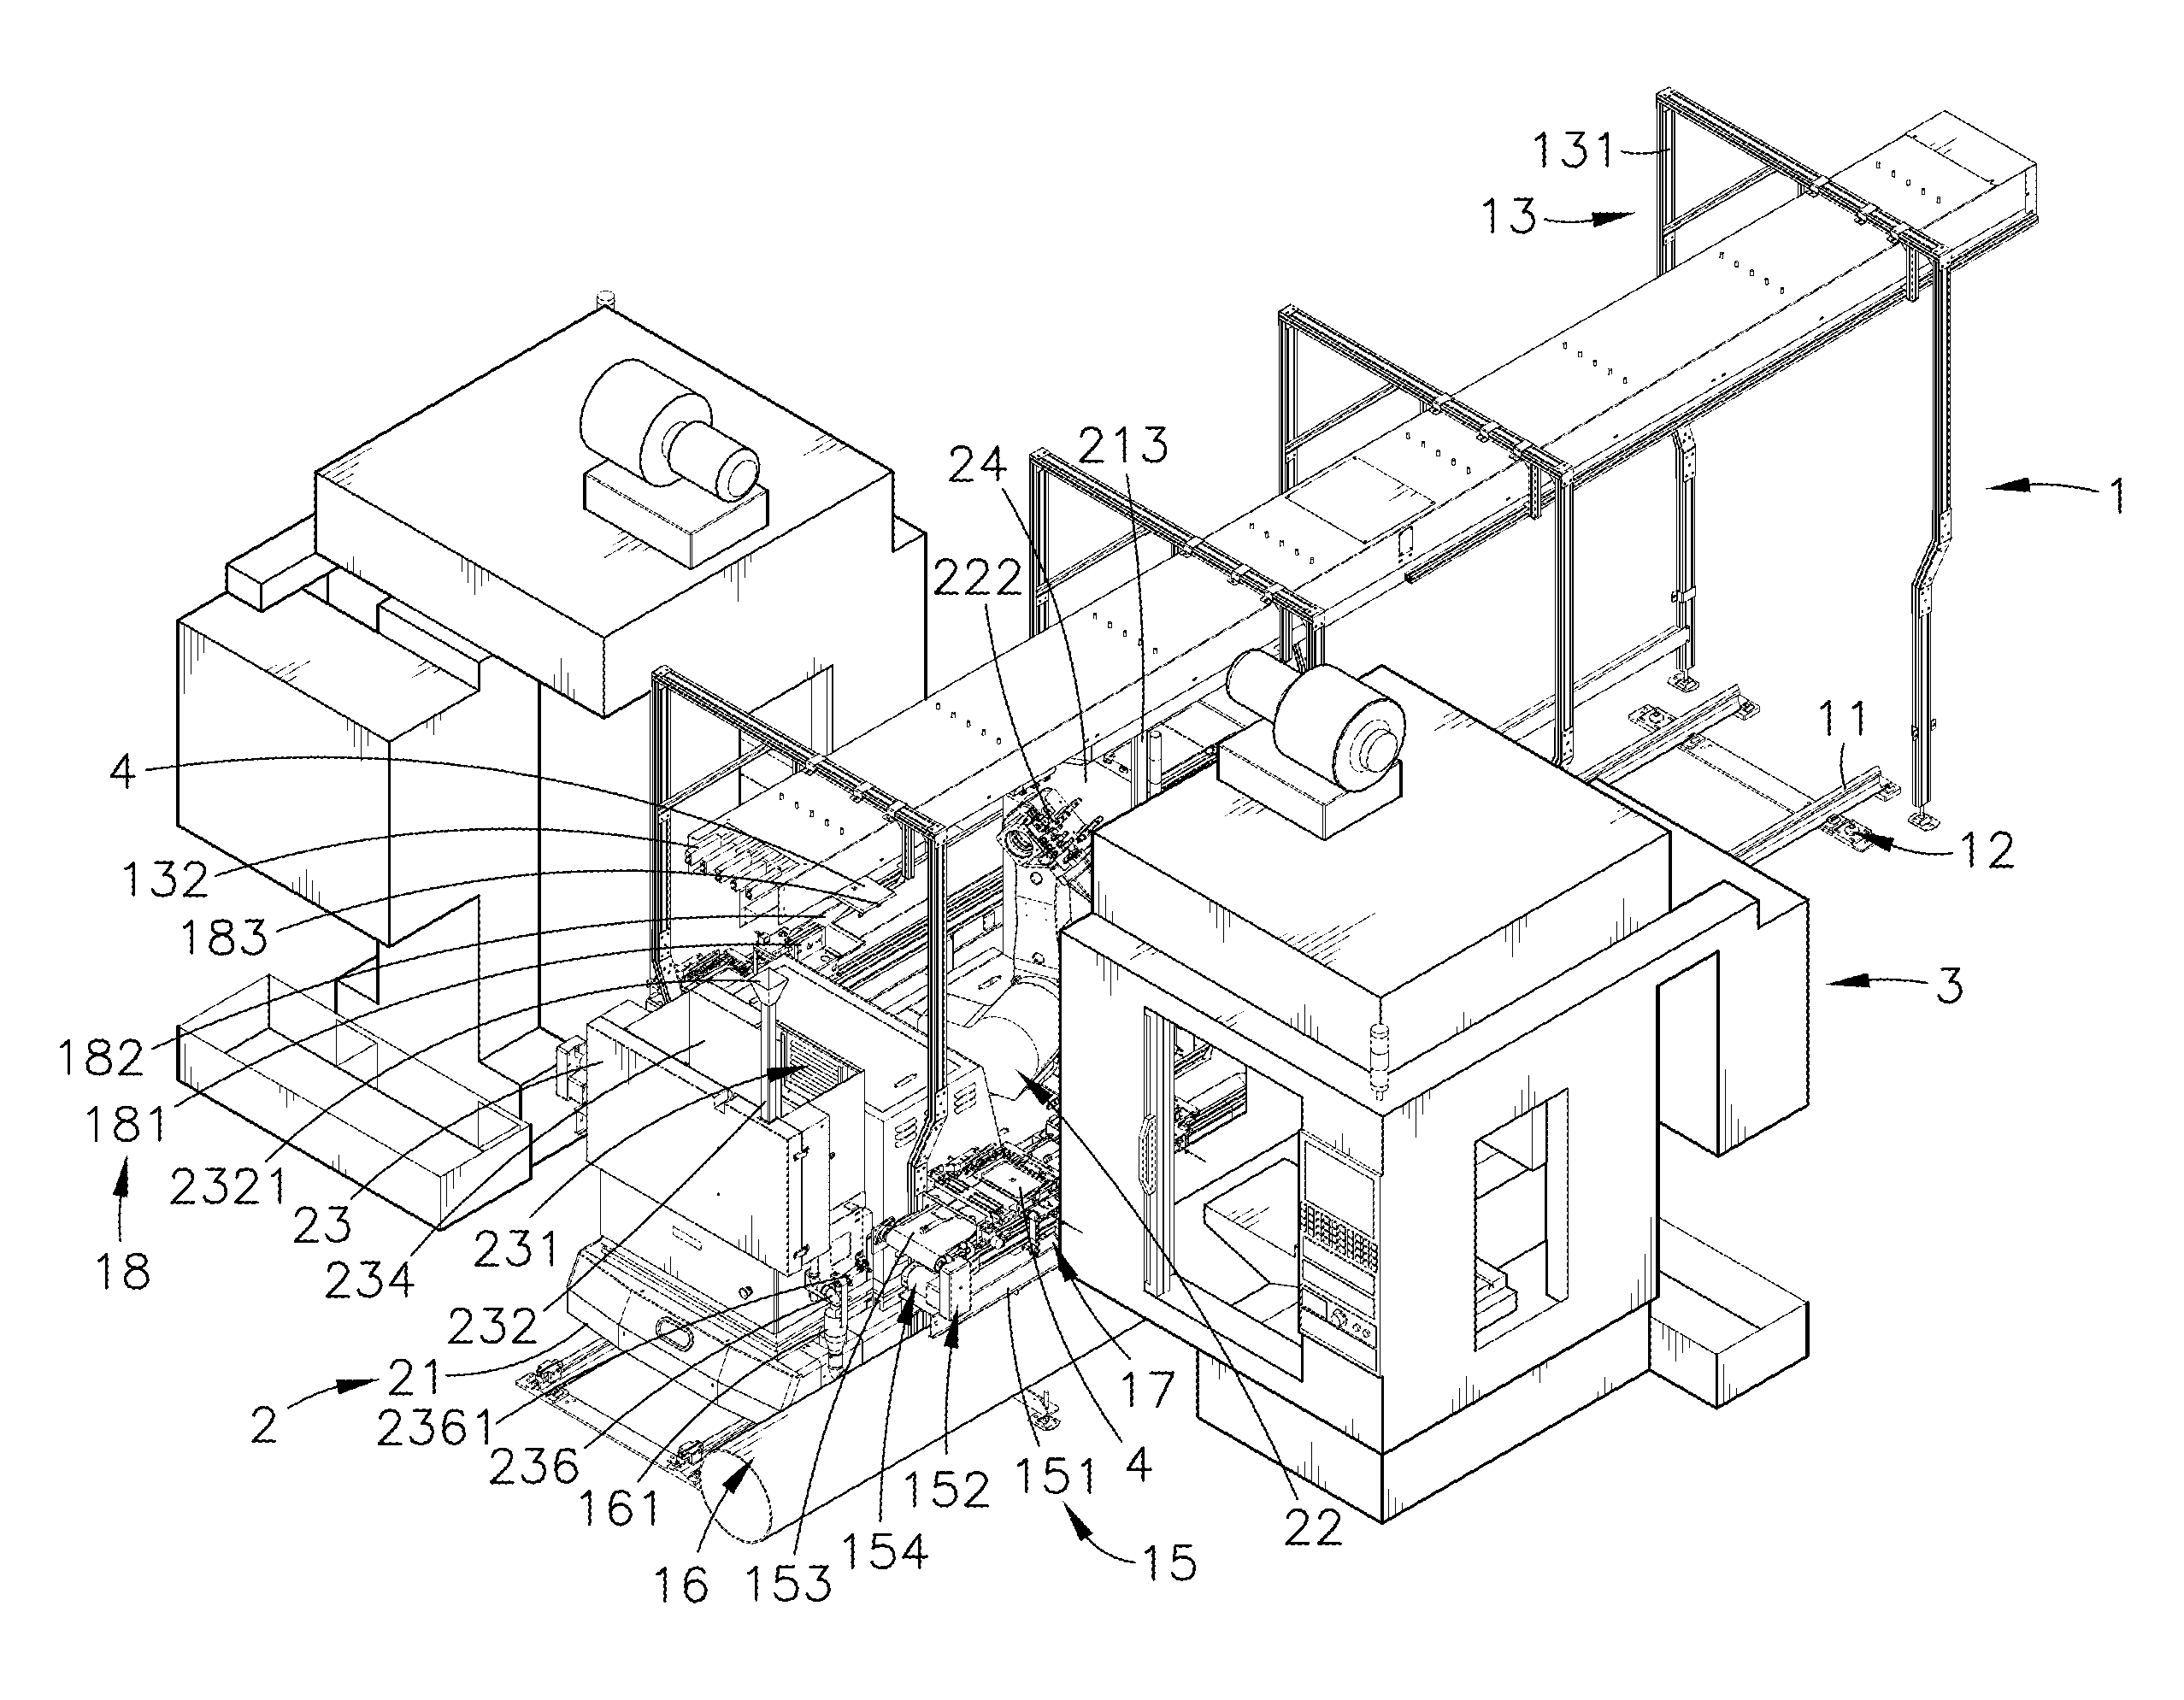 Mobile robotic trolley-based processing system and mobile robotic trolley thereof